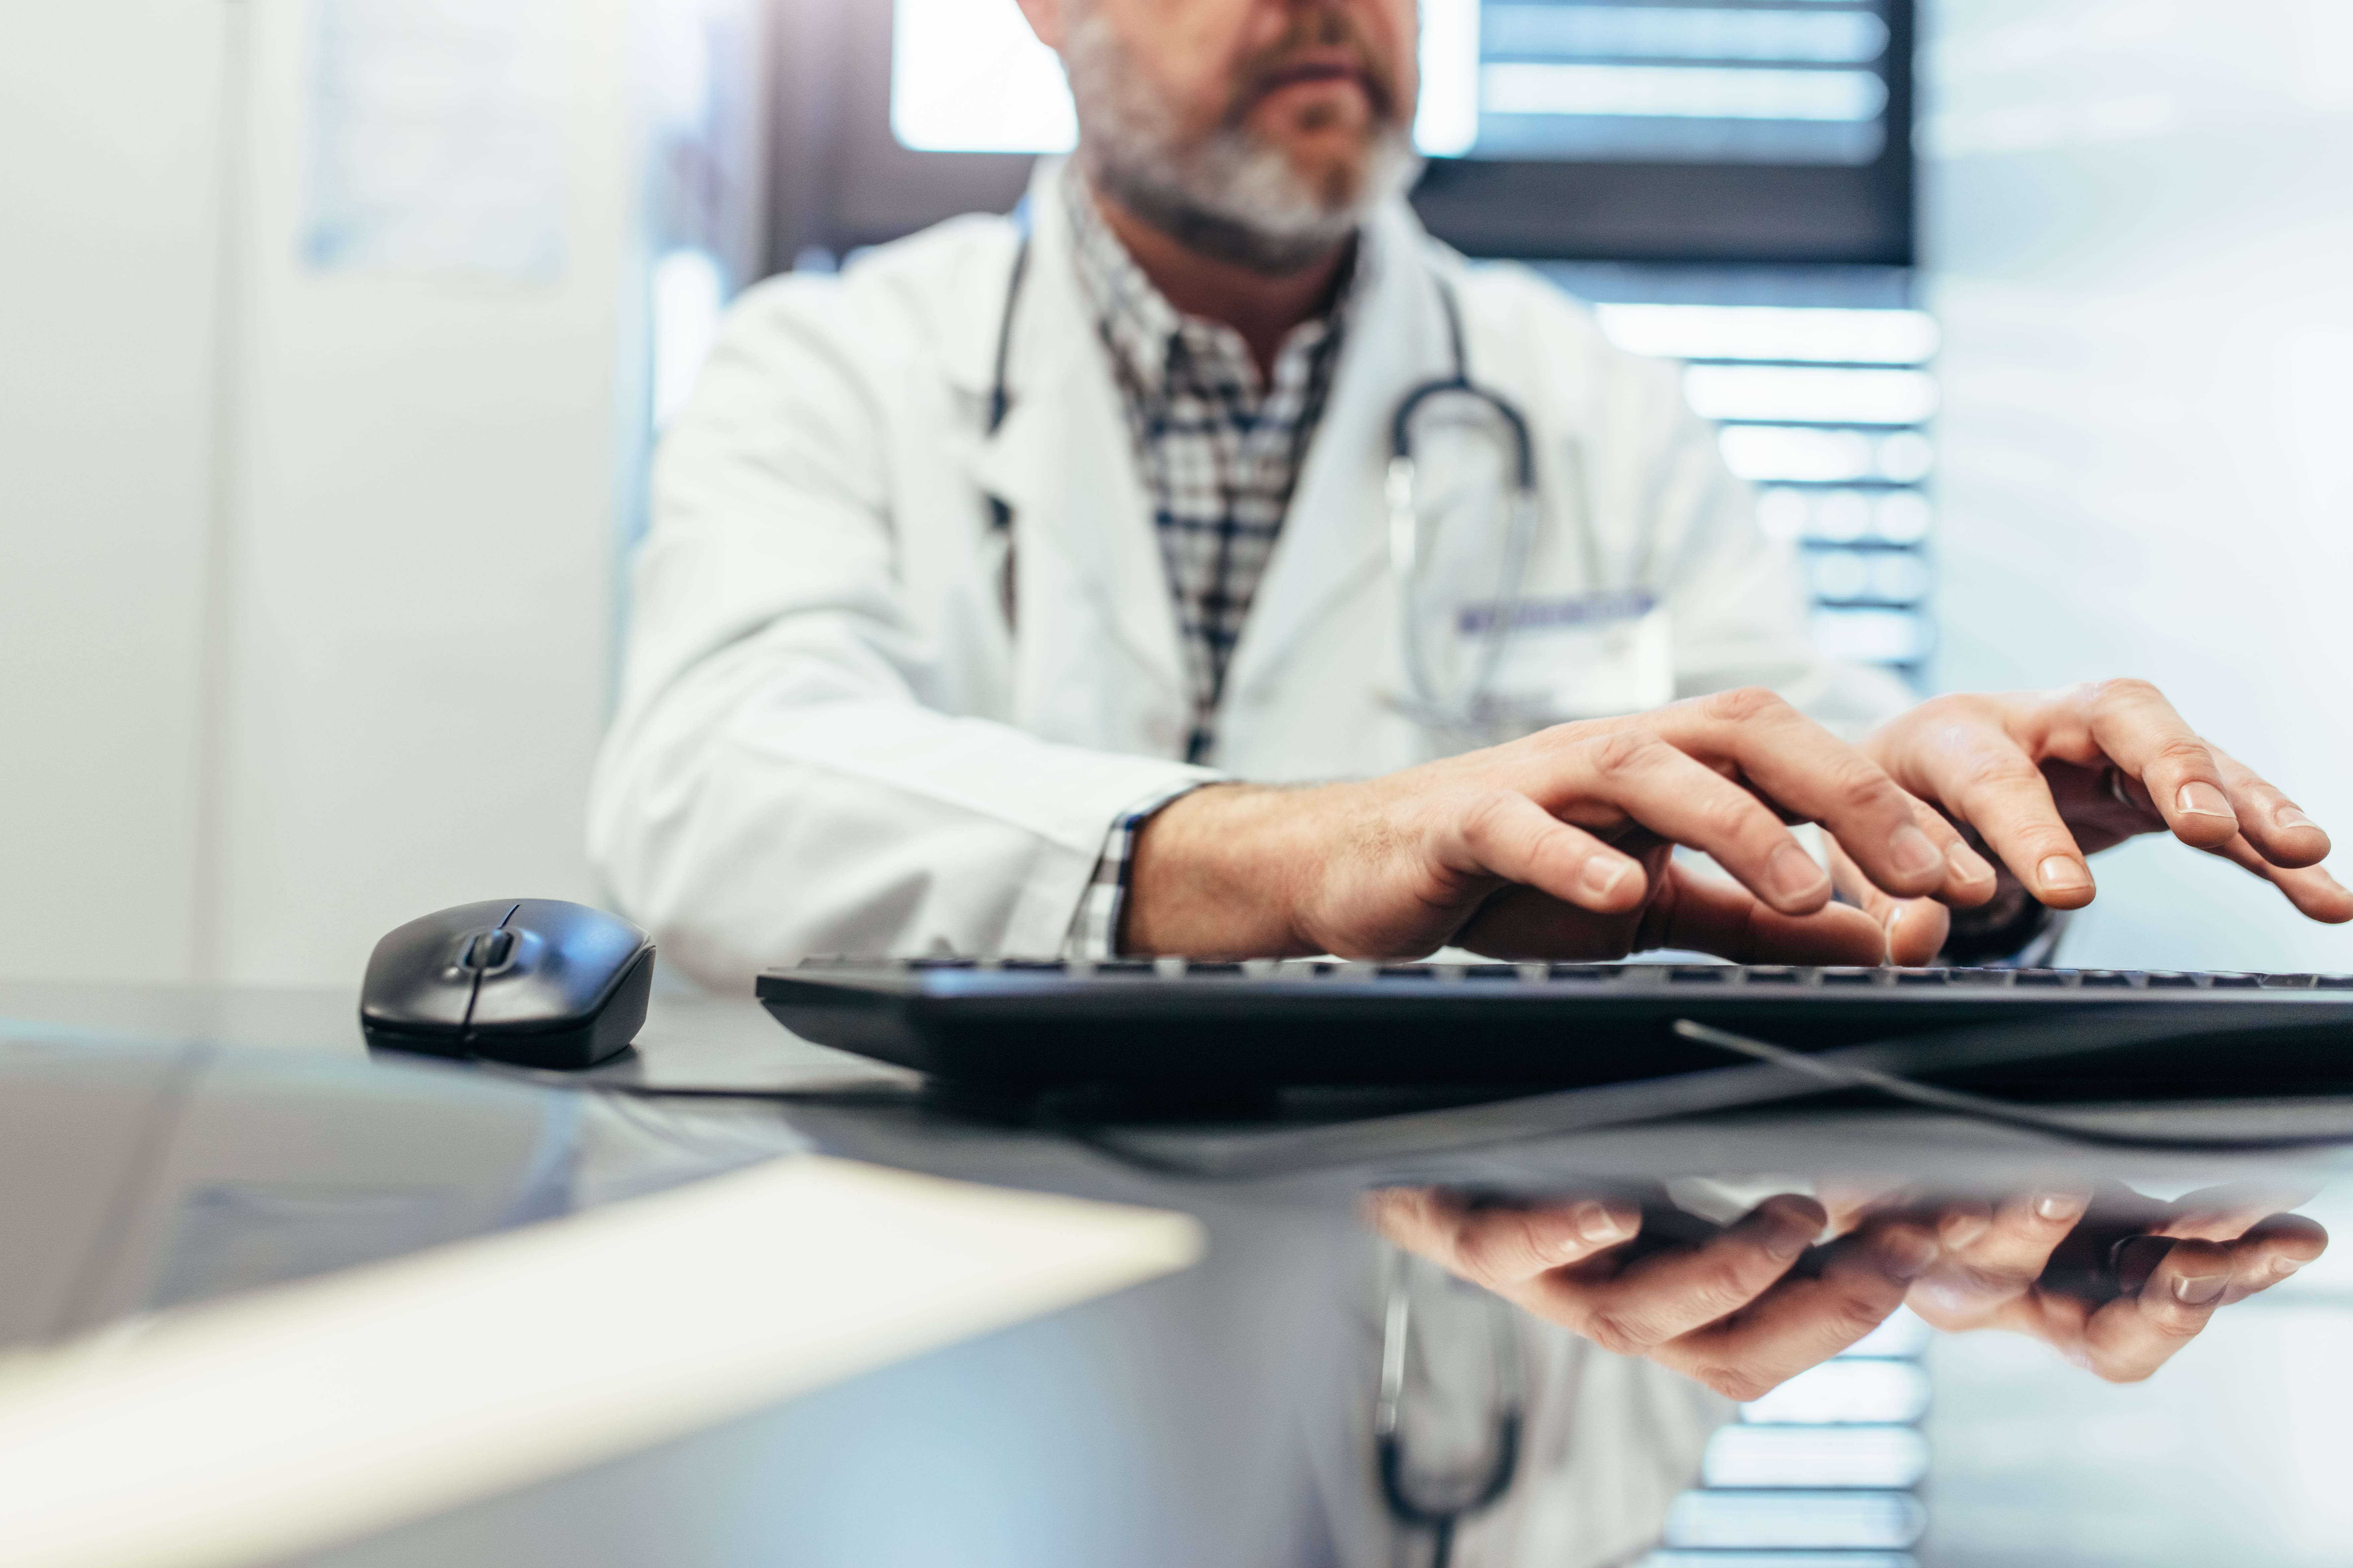 Variation in physician EHR documentation can put patient safety at risk: study